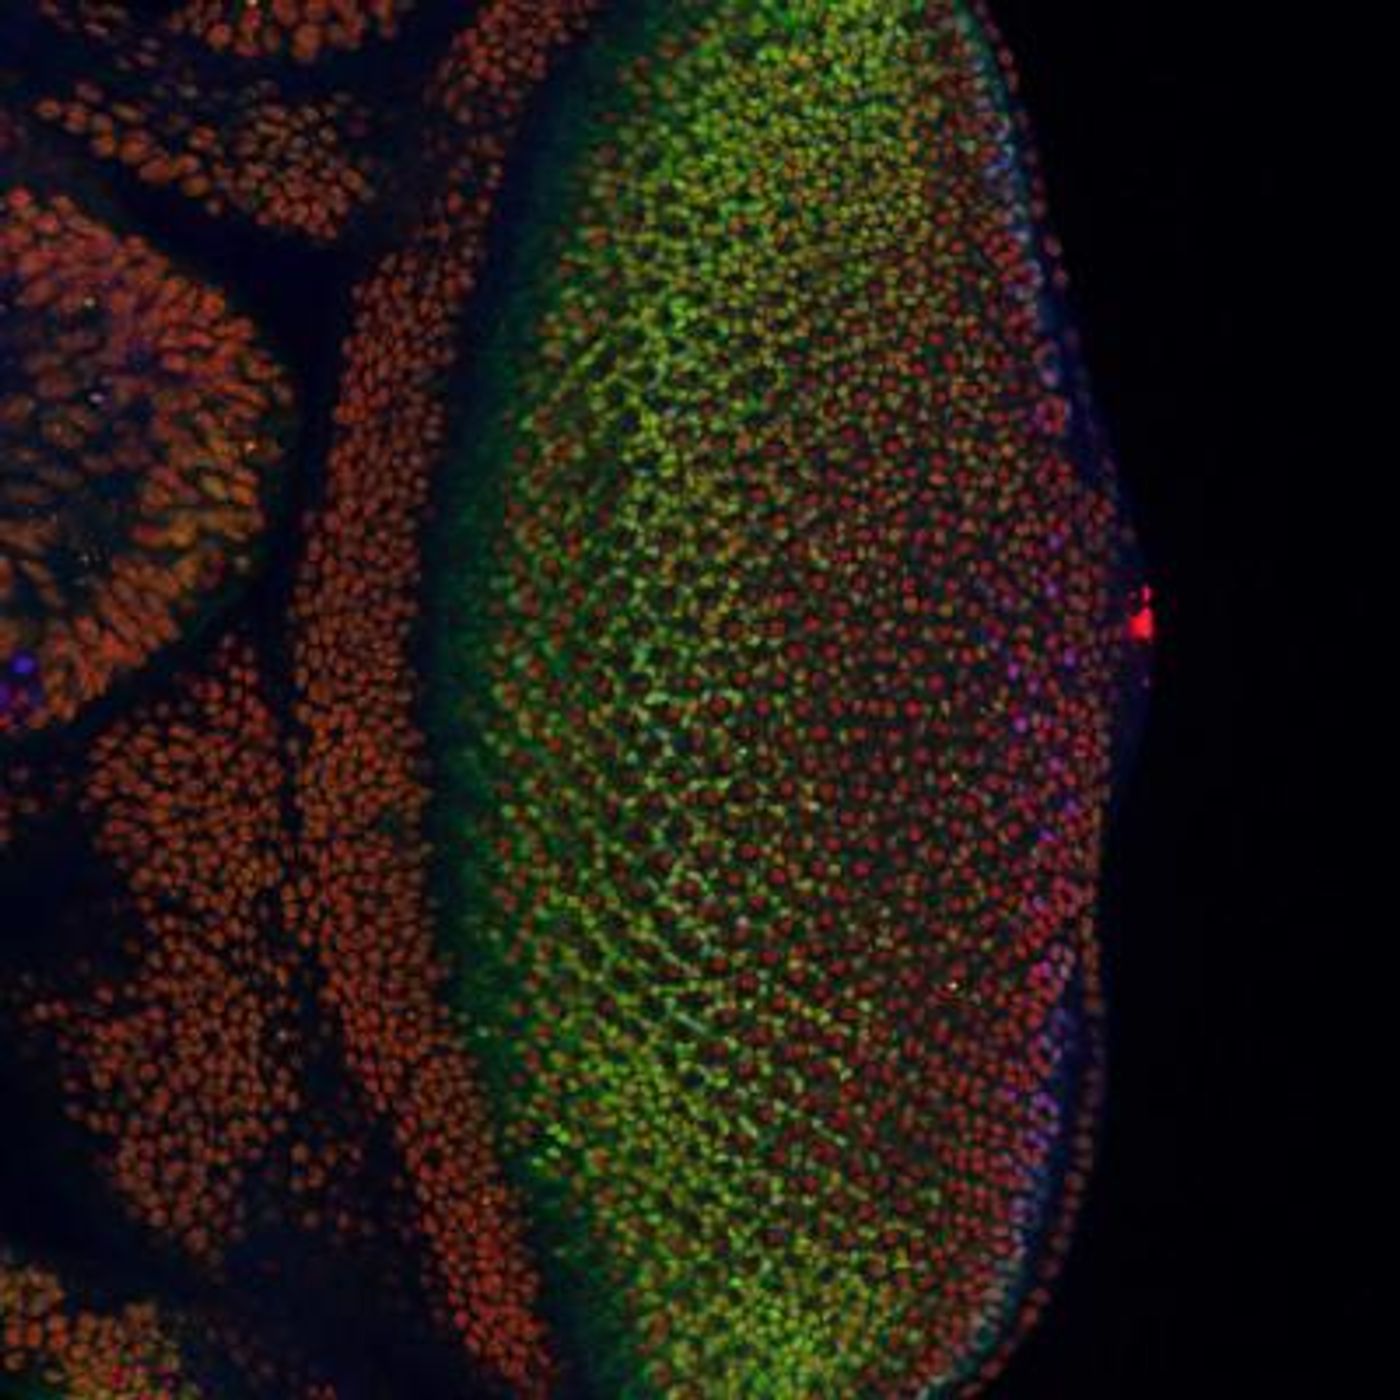 The fruit fly's eye is an intricate pattern of many different specialized cells